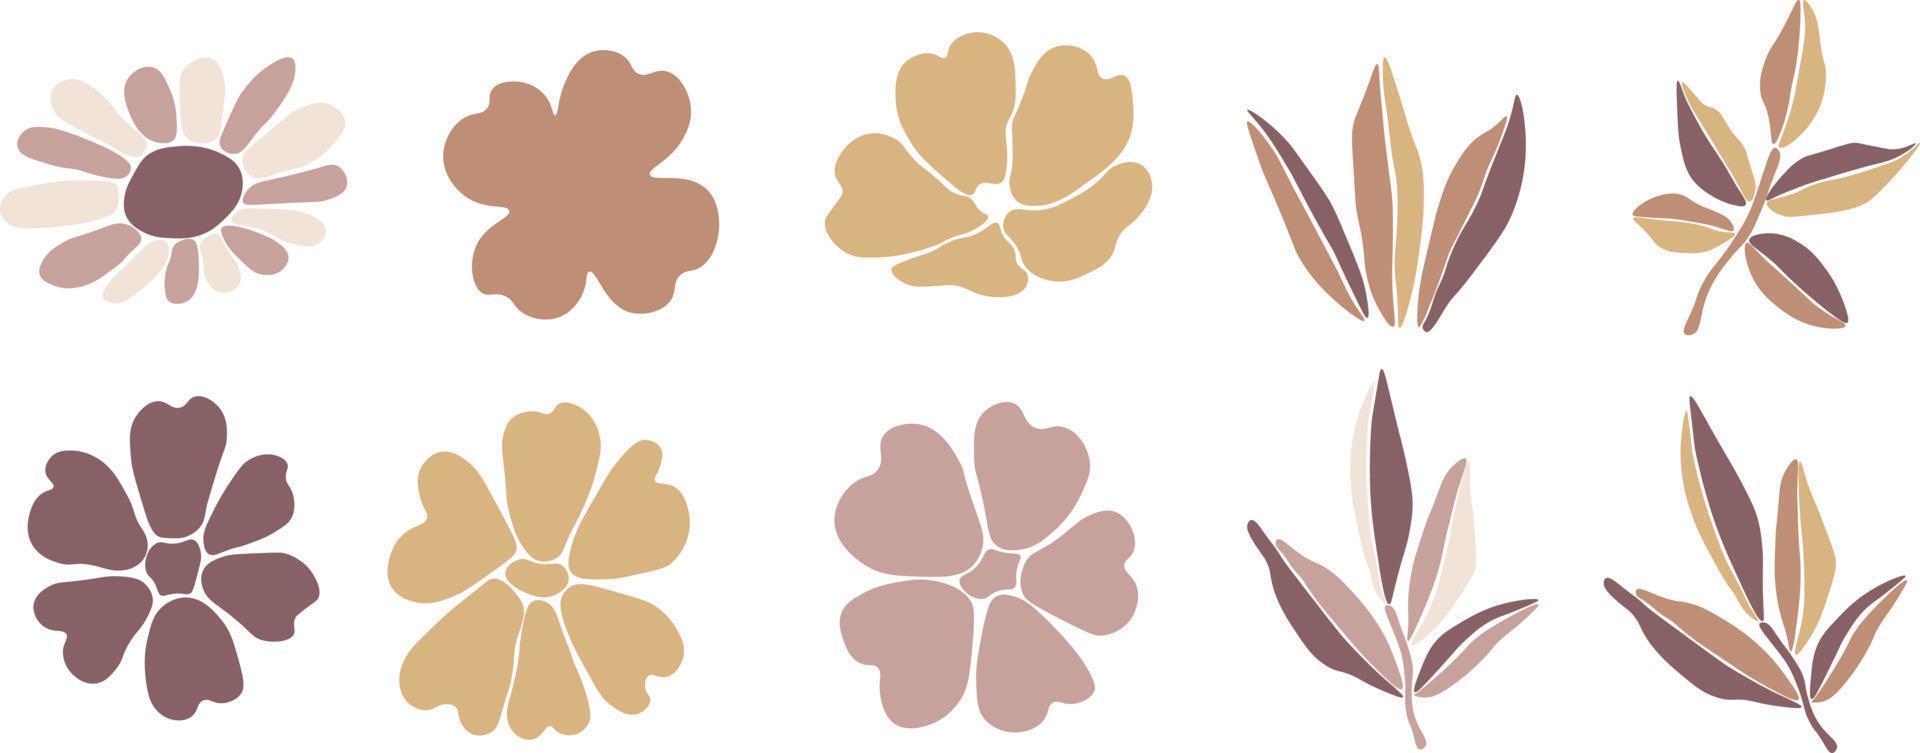 Floral collection with leaves, flower bouquets. Vector flowers. Icons isolated on white background.